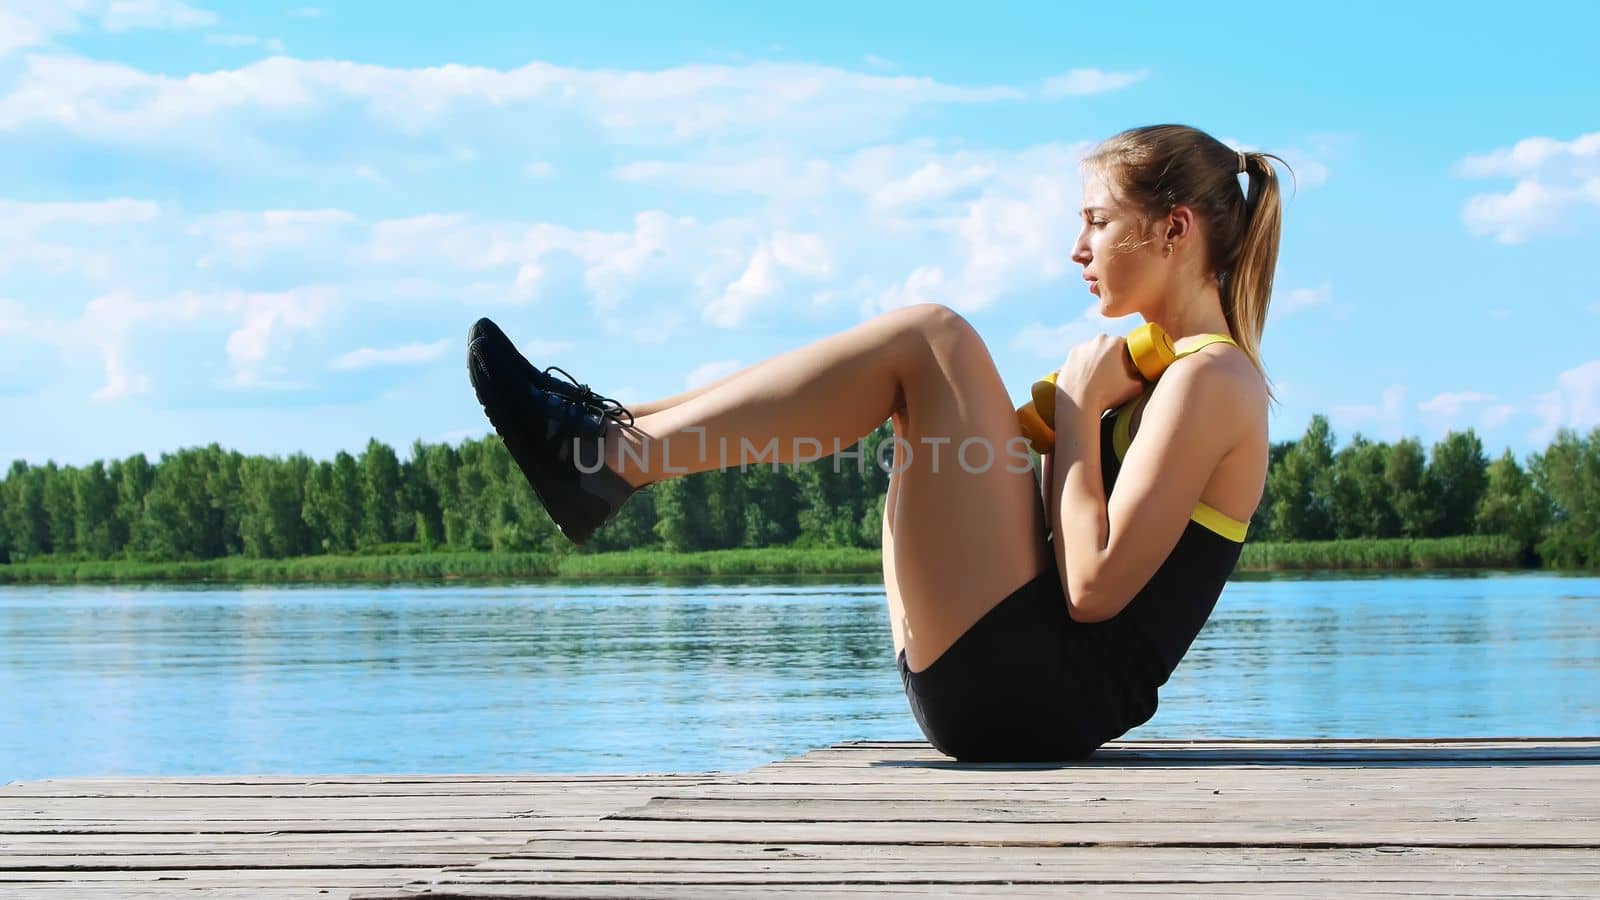 Beautiful, athletic young blond woman stretching, swings press. Lake, river, blue sky and forest in the background, summer sunny day by djtreneryay